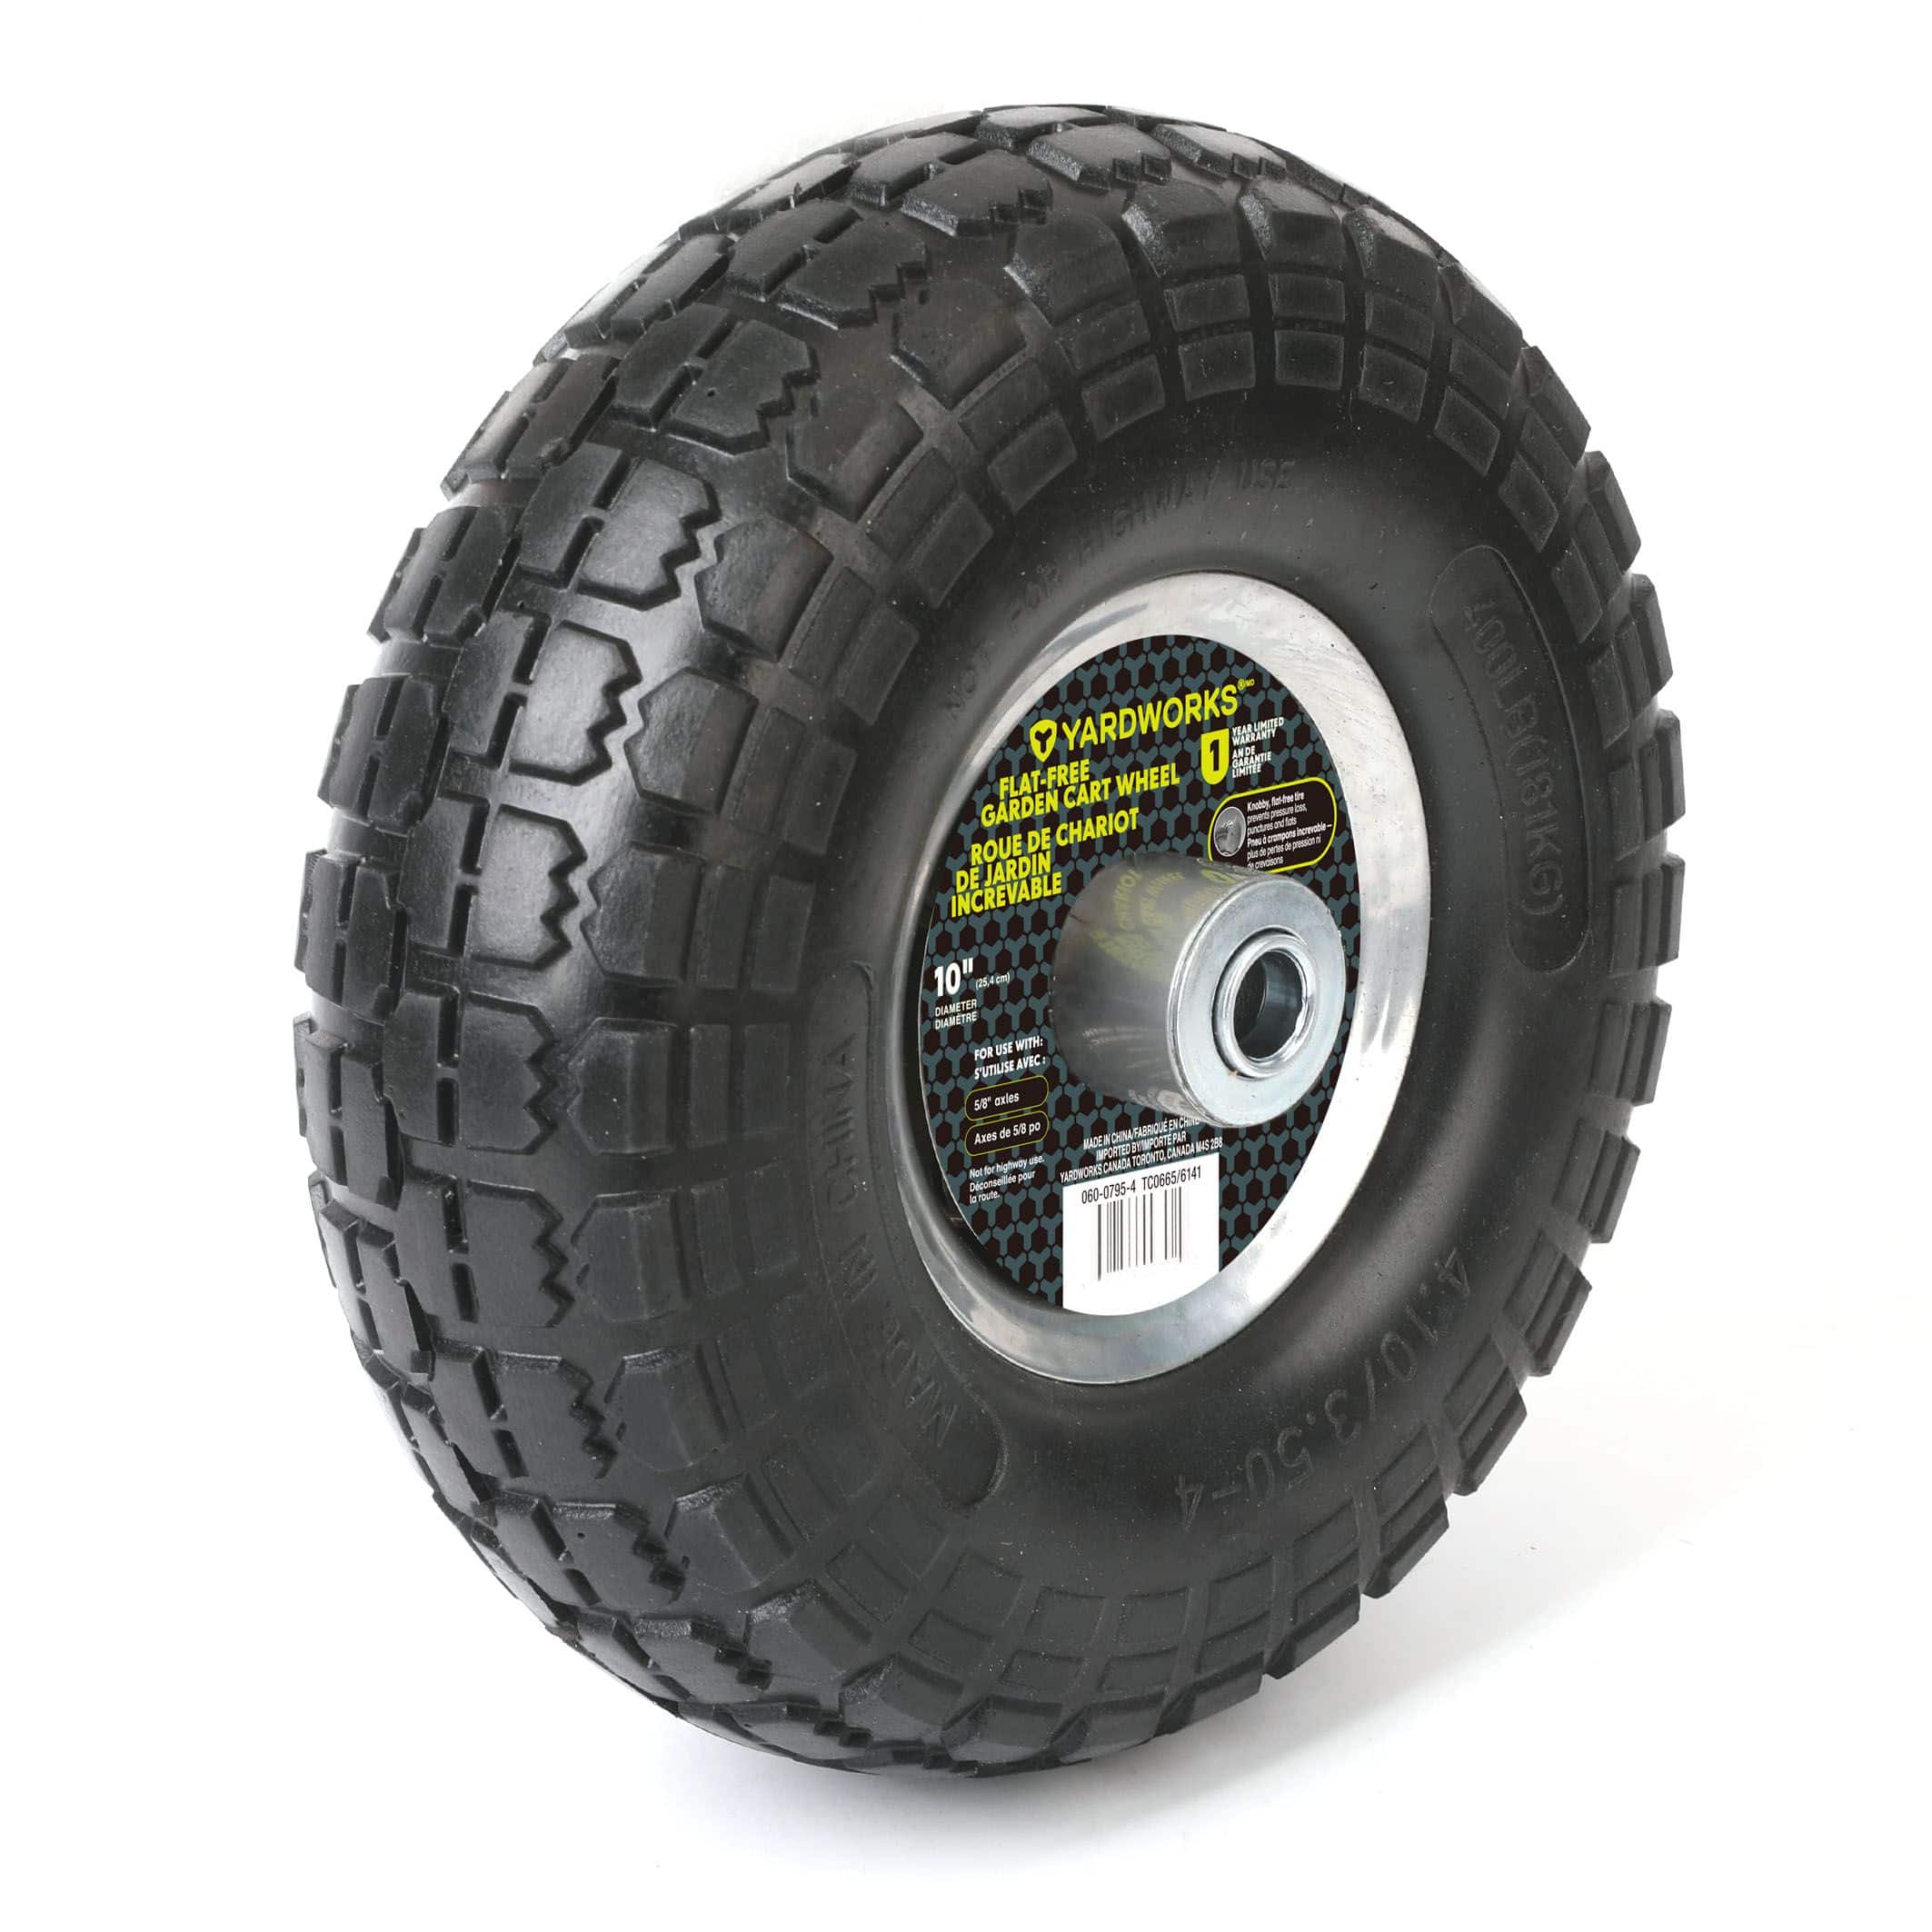 Yardworks 10-in Flat-Free Replacement Wheel/Tire